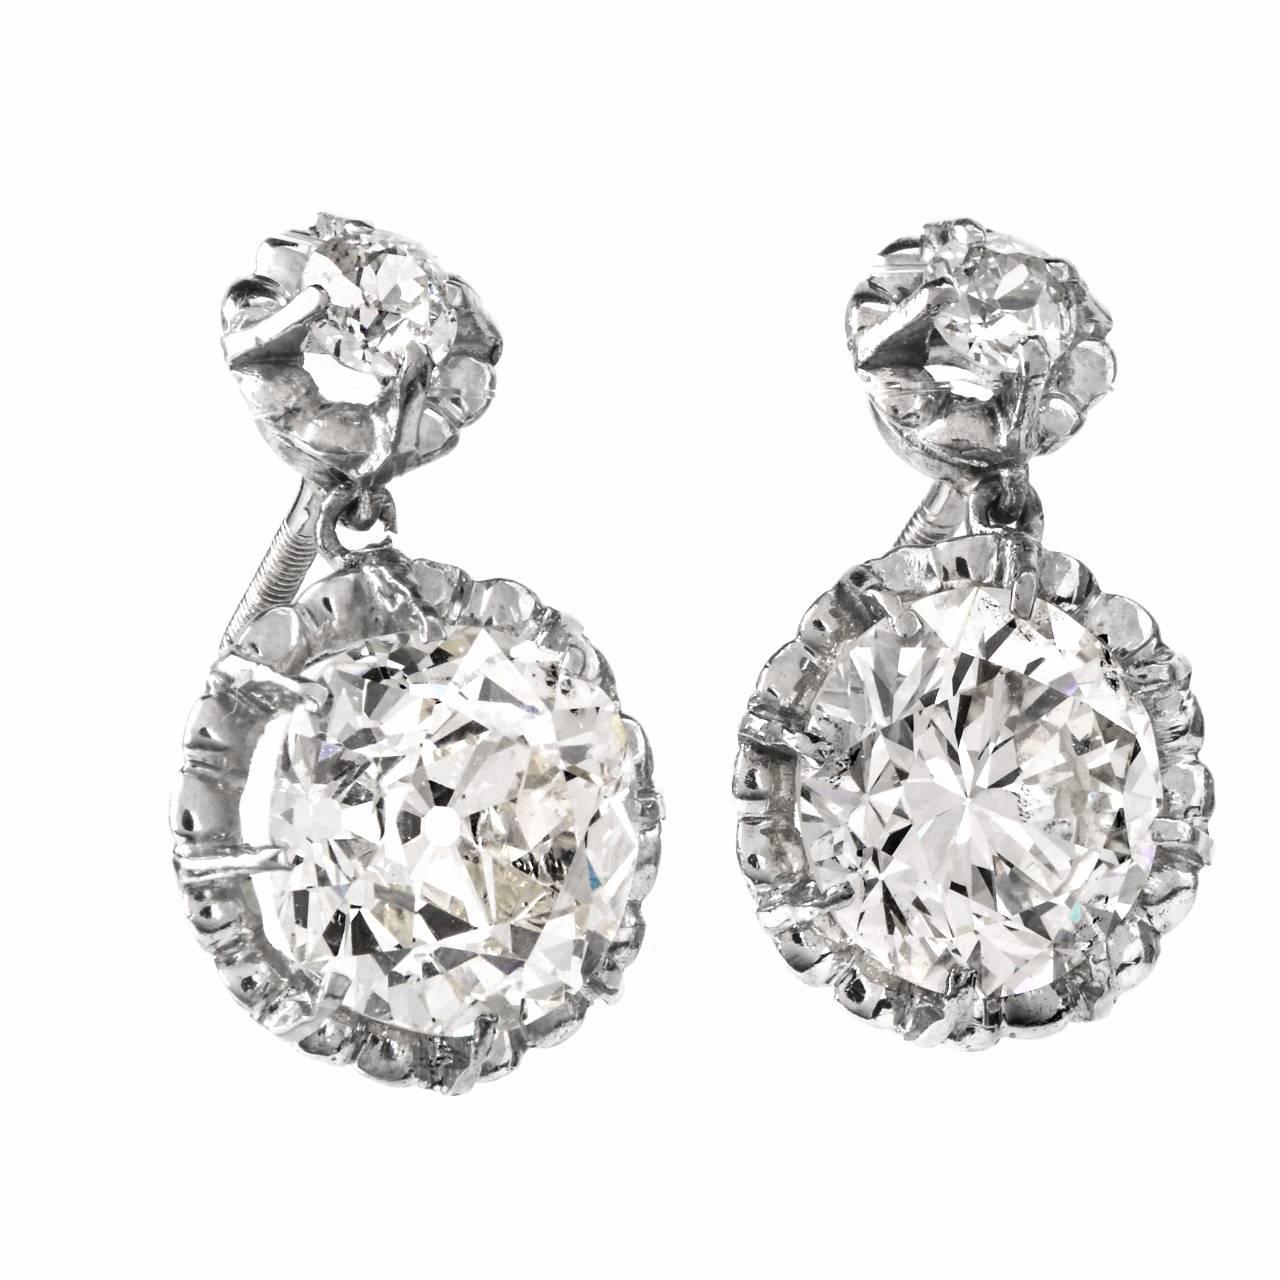 These captivating vintage earrings are crafted in platinum, weigh cumulatively 6.8 grams and  each measure 18 mm long.  The two large diamonds weigh cumulatively 6.05 carats in total  and are graded I - J color and VS2 to SI1 clarity.  And two